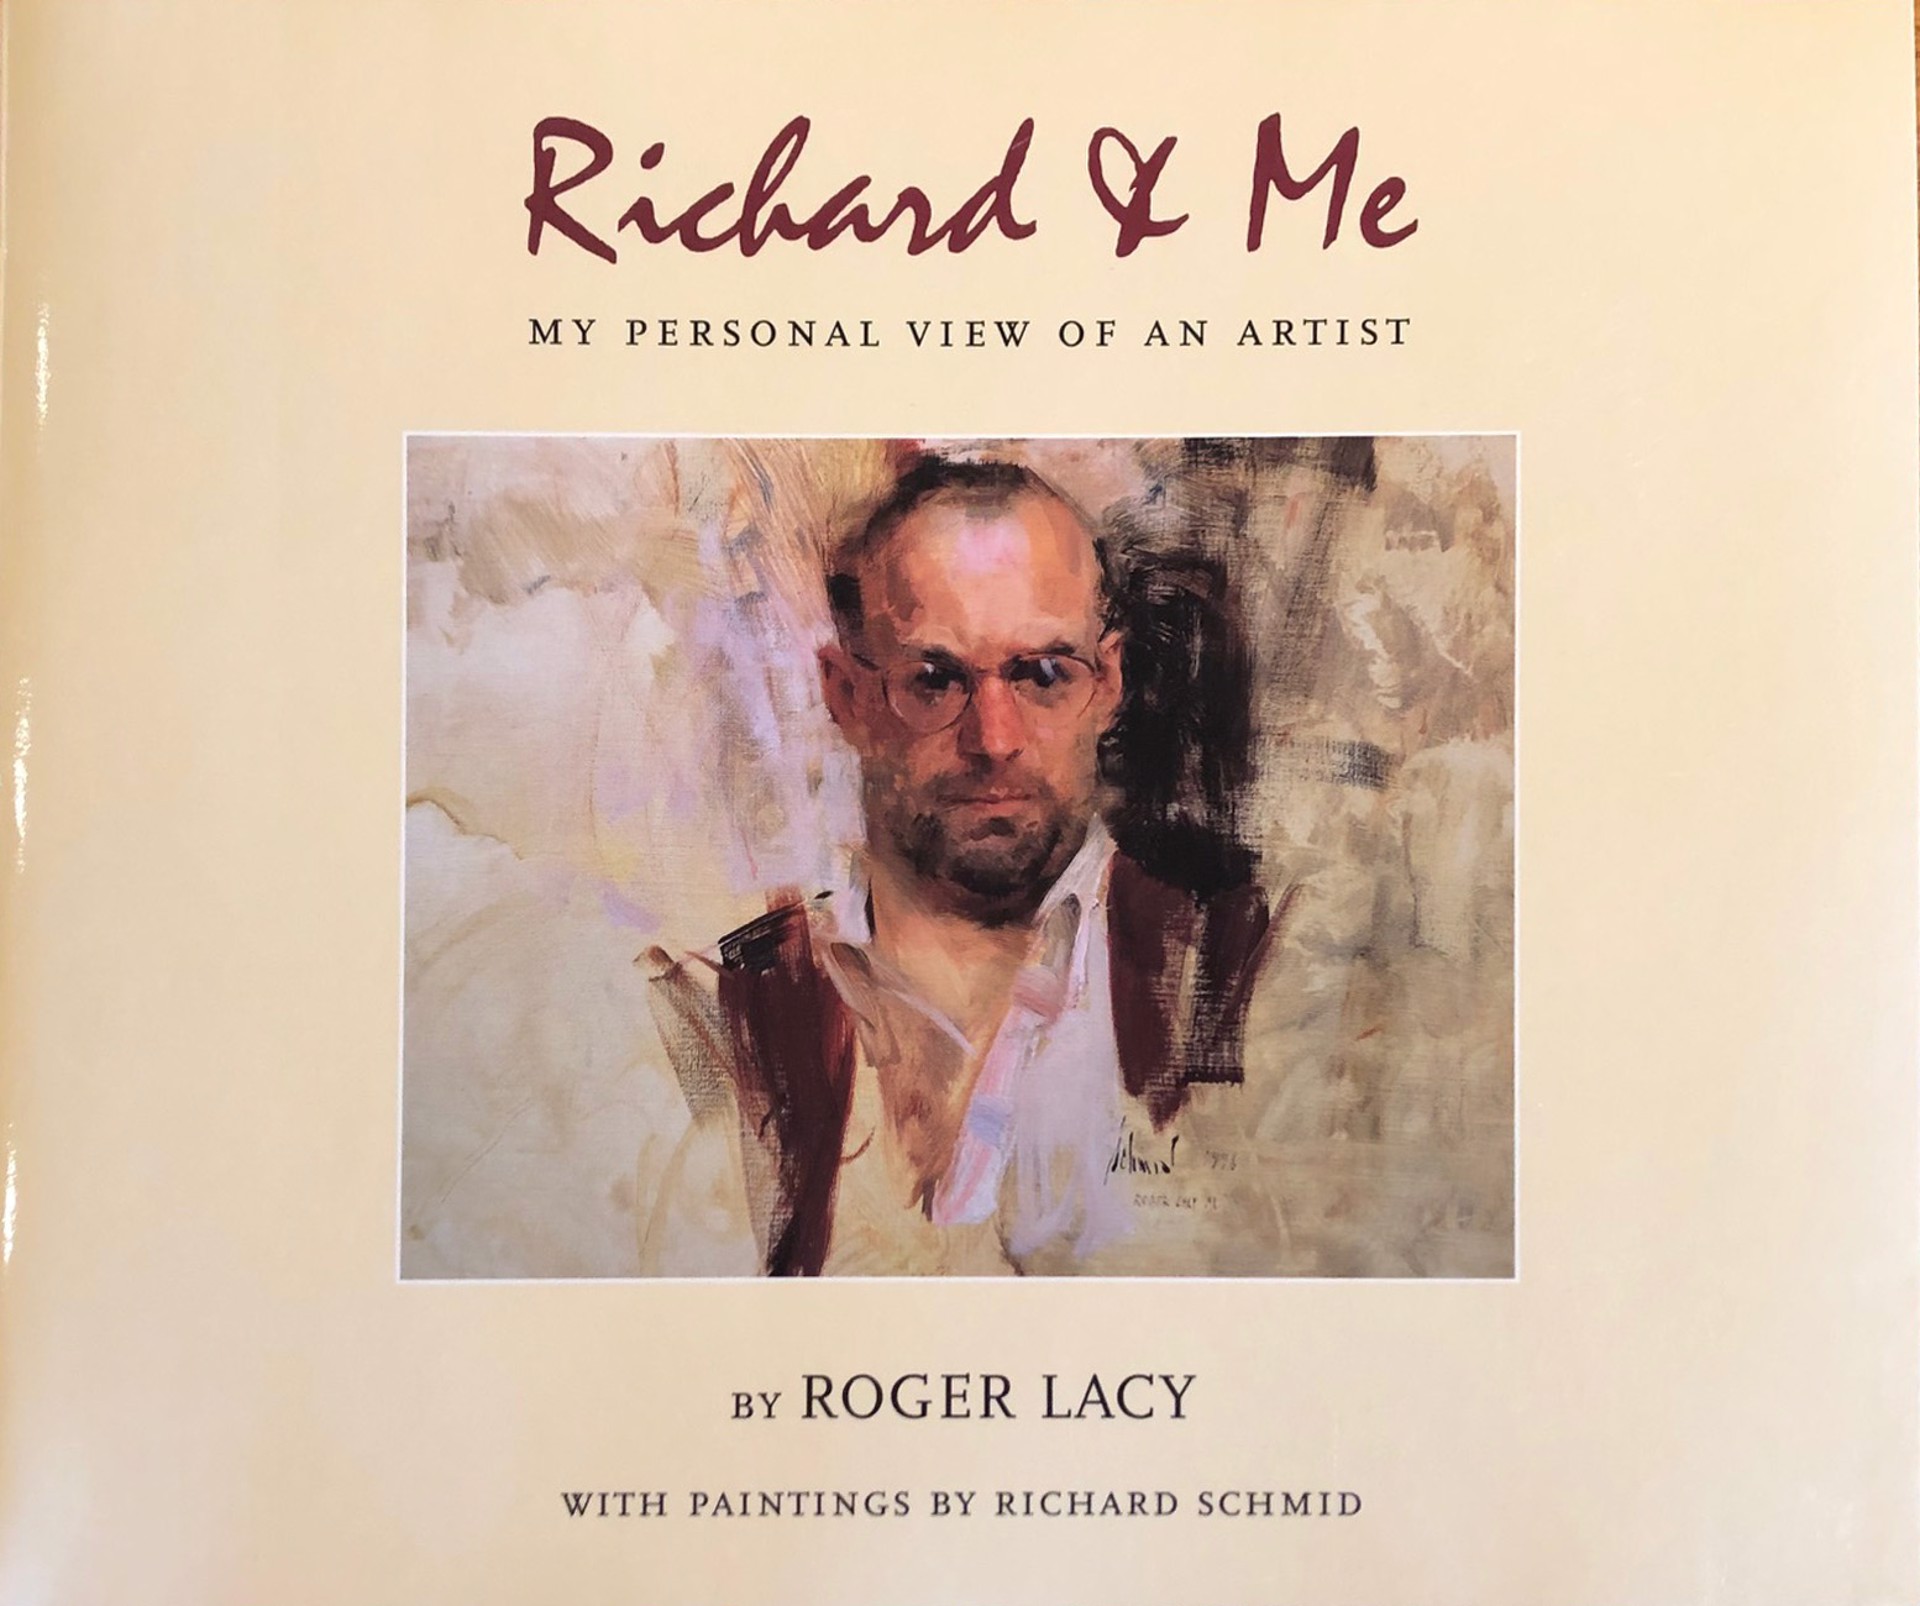 Richard & Me by Roger Lacy